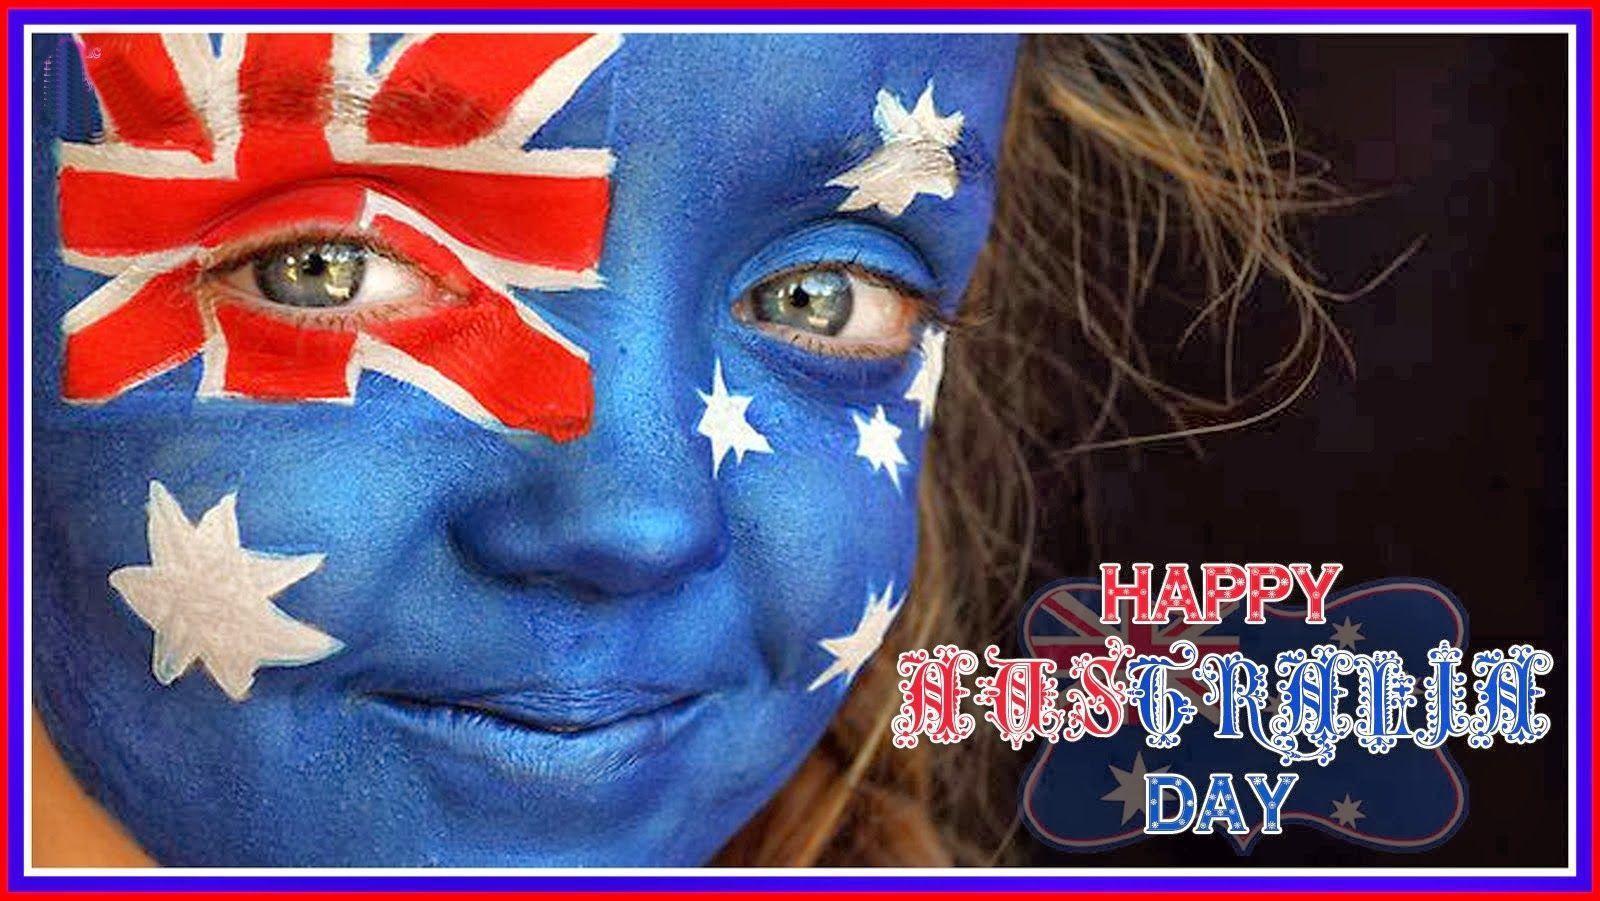 Happy Australia Day Wishes Cards & Image with Best Wishes, Quotes